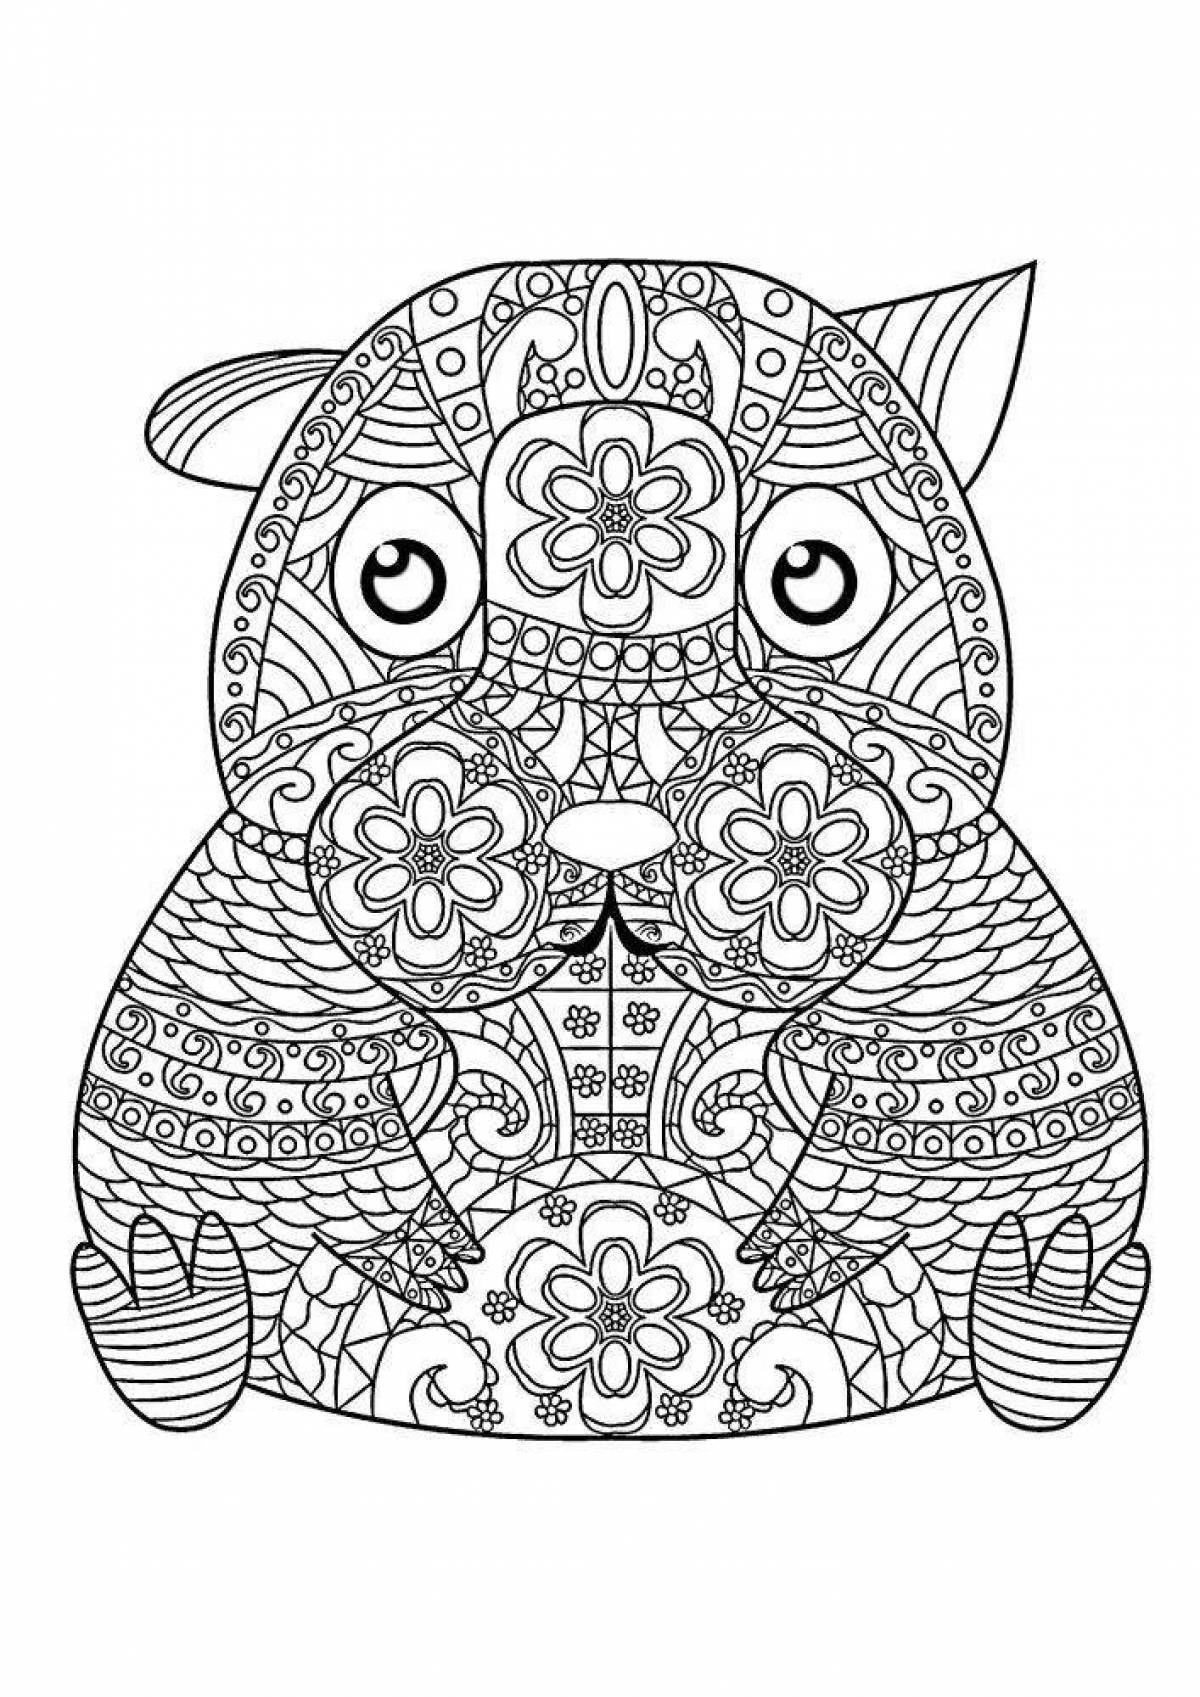 Peaceful coloring hamster antistress